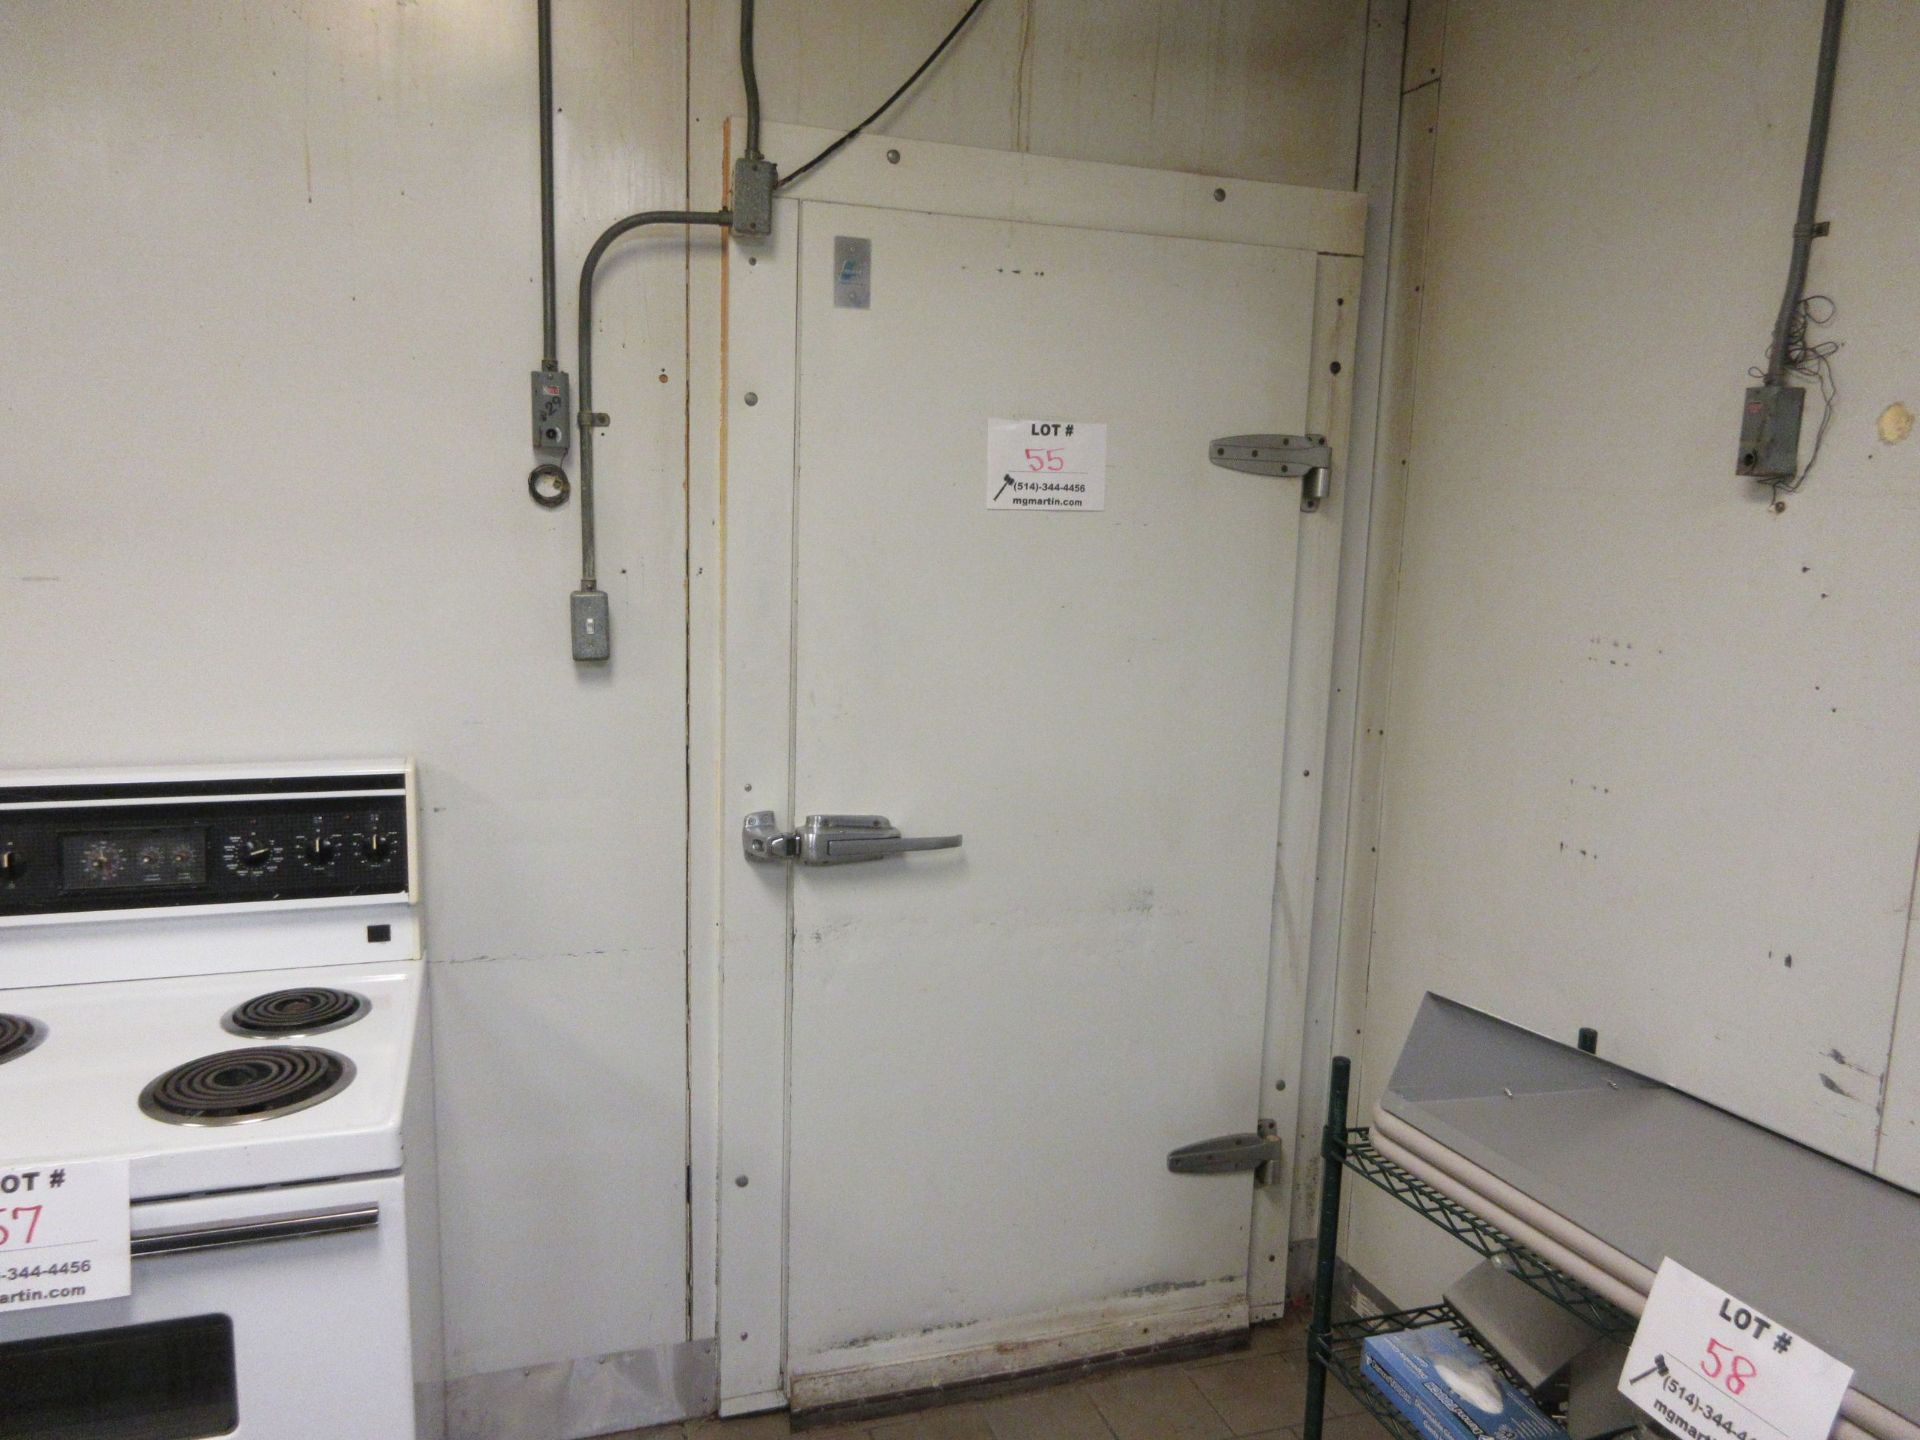 Walk in freezer w/t BLANCHARD-NESS cooling unit with (2) fans c/w aprox. 94" w x 86"d x 103" h